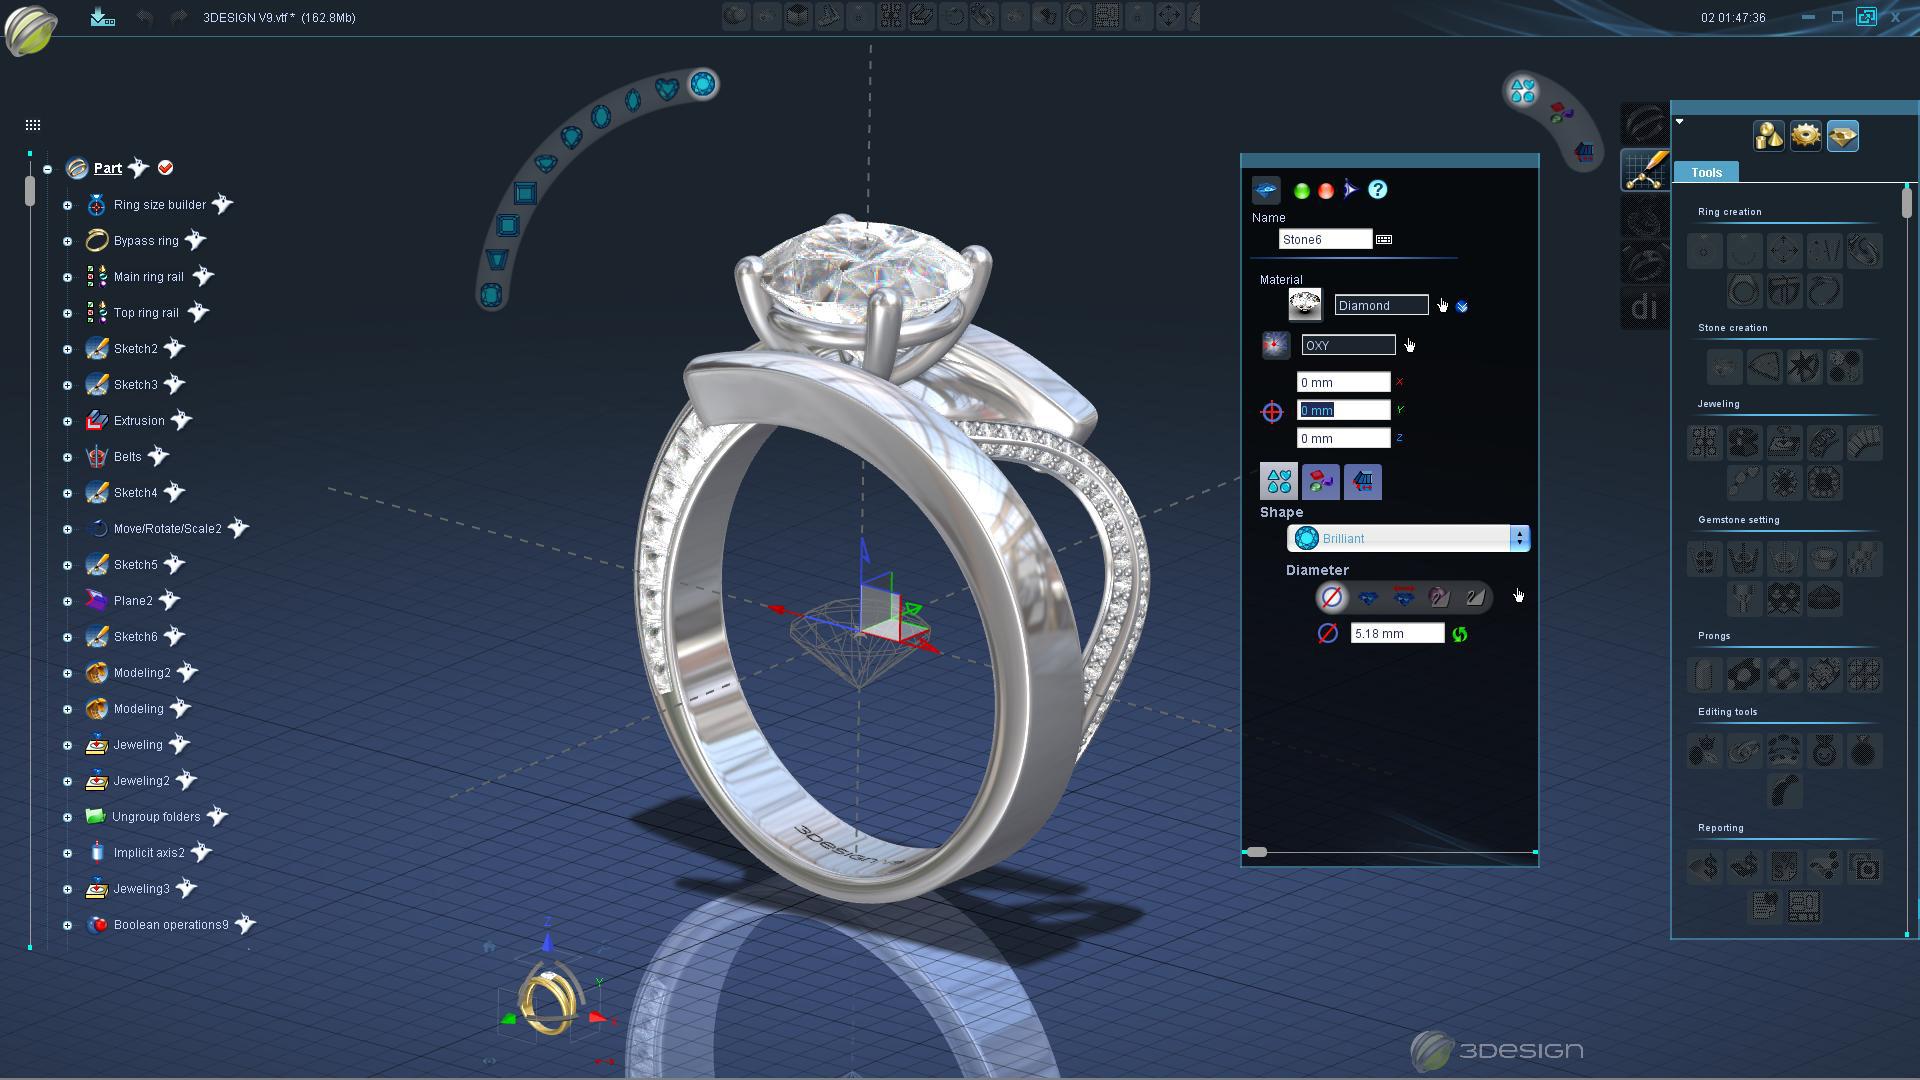 Twisted Engagement Solitaire Ring 3D CAD Design-O11031: Jewelry Diamond  Engagement Ring 3D Print CAD Model - Kindle edition by Tuffenkjian, Pierre.  Crafts, Hobbies & Home Kindle eBooks @ Amazon.com.